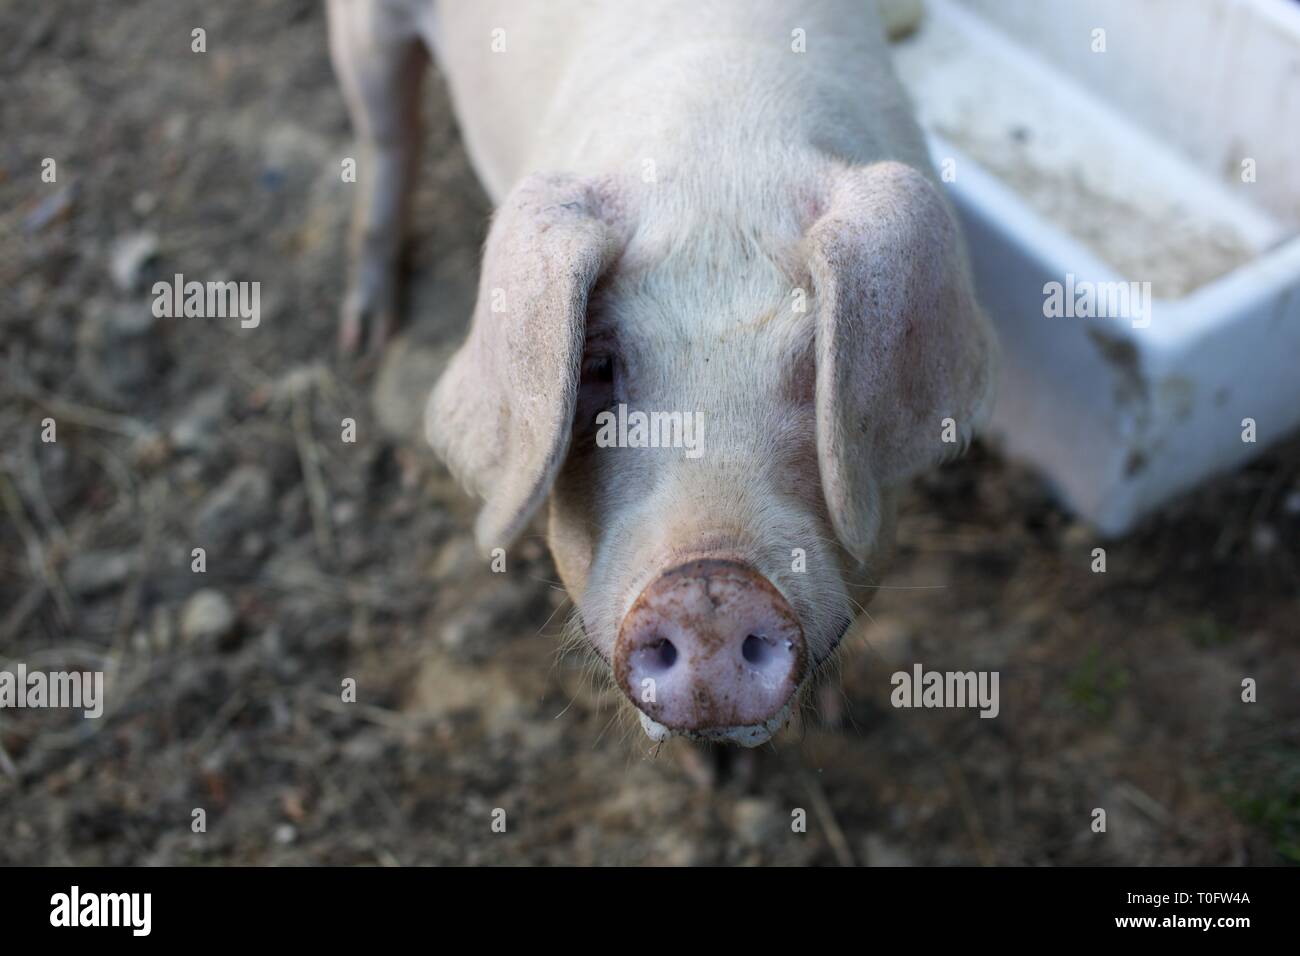 Close up of head of pink pig in farmyard Stock Photo